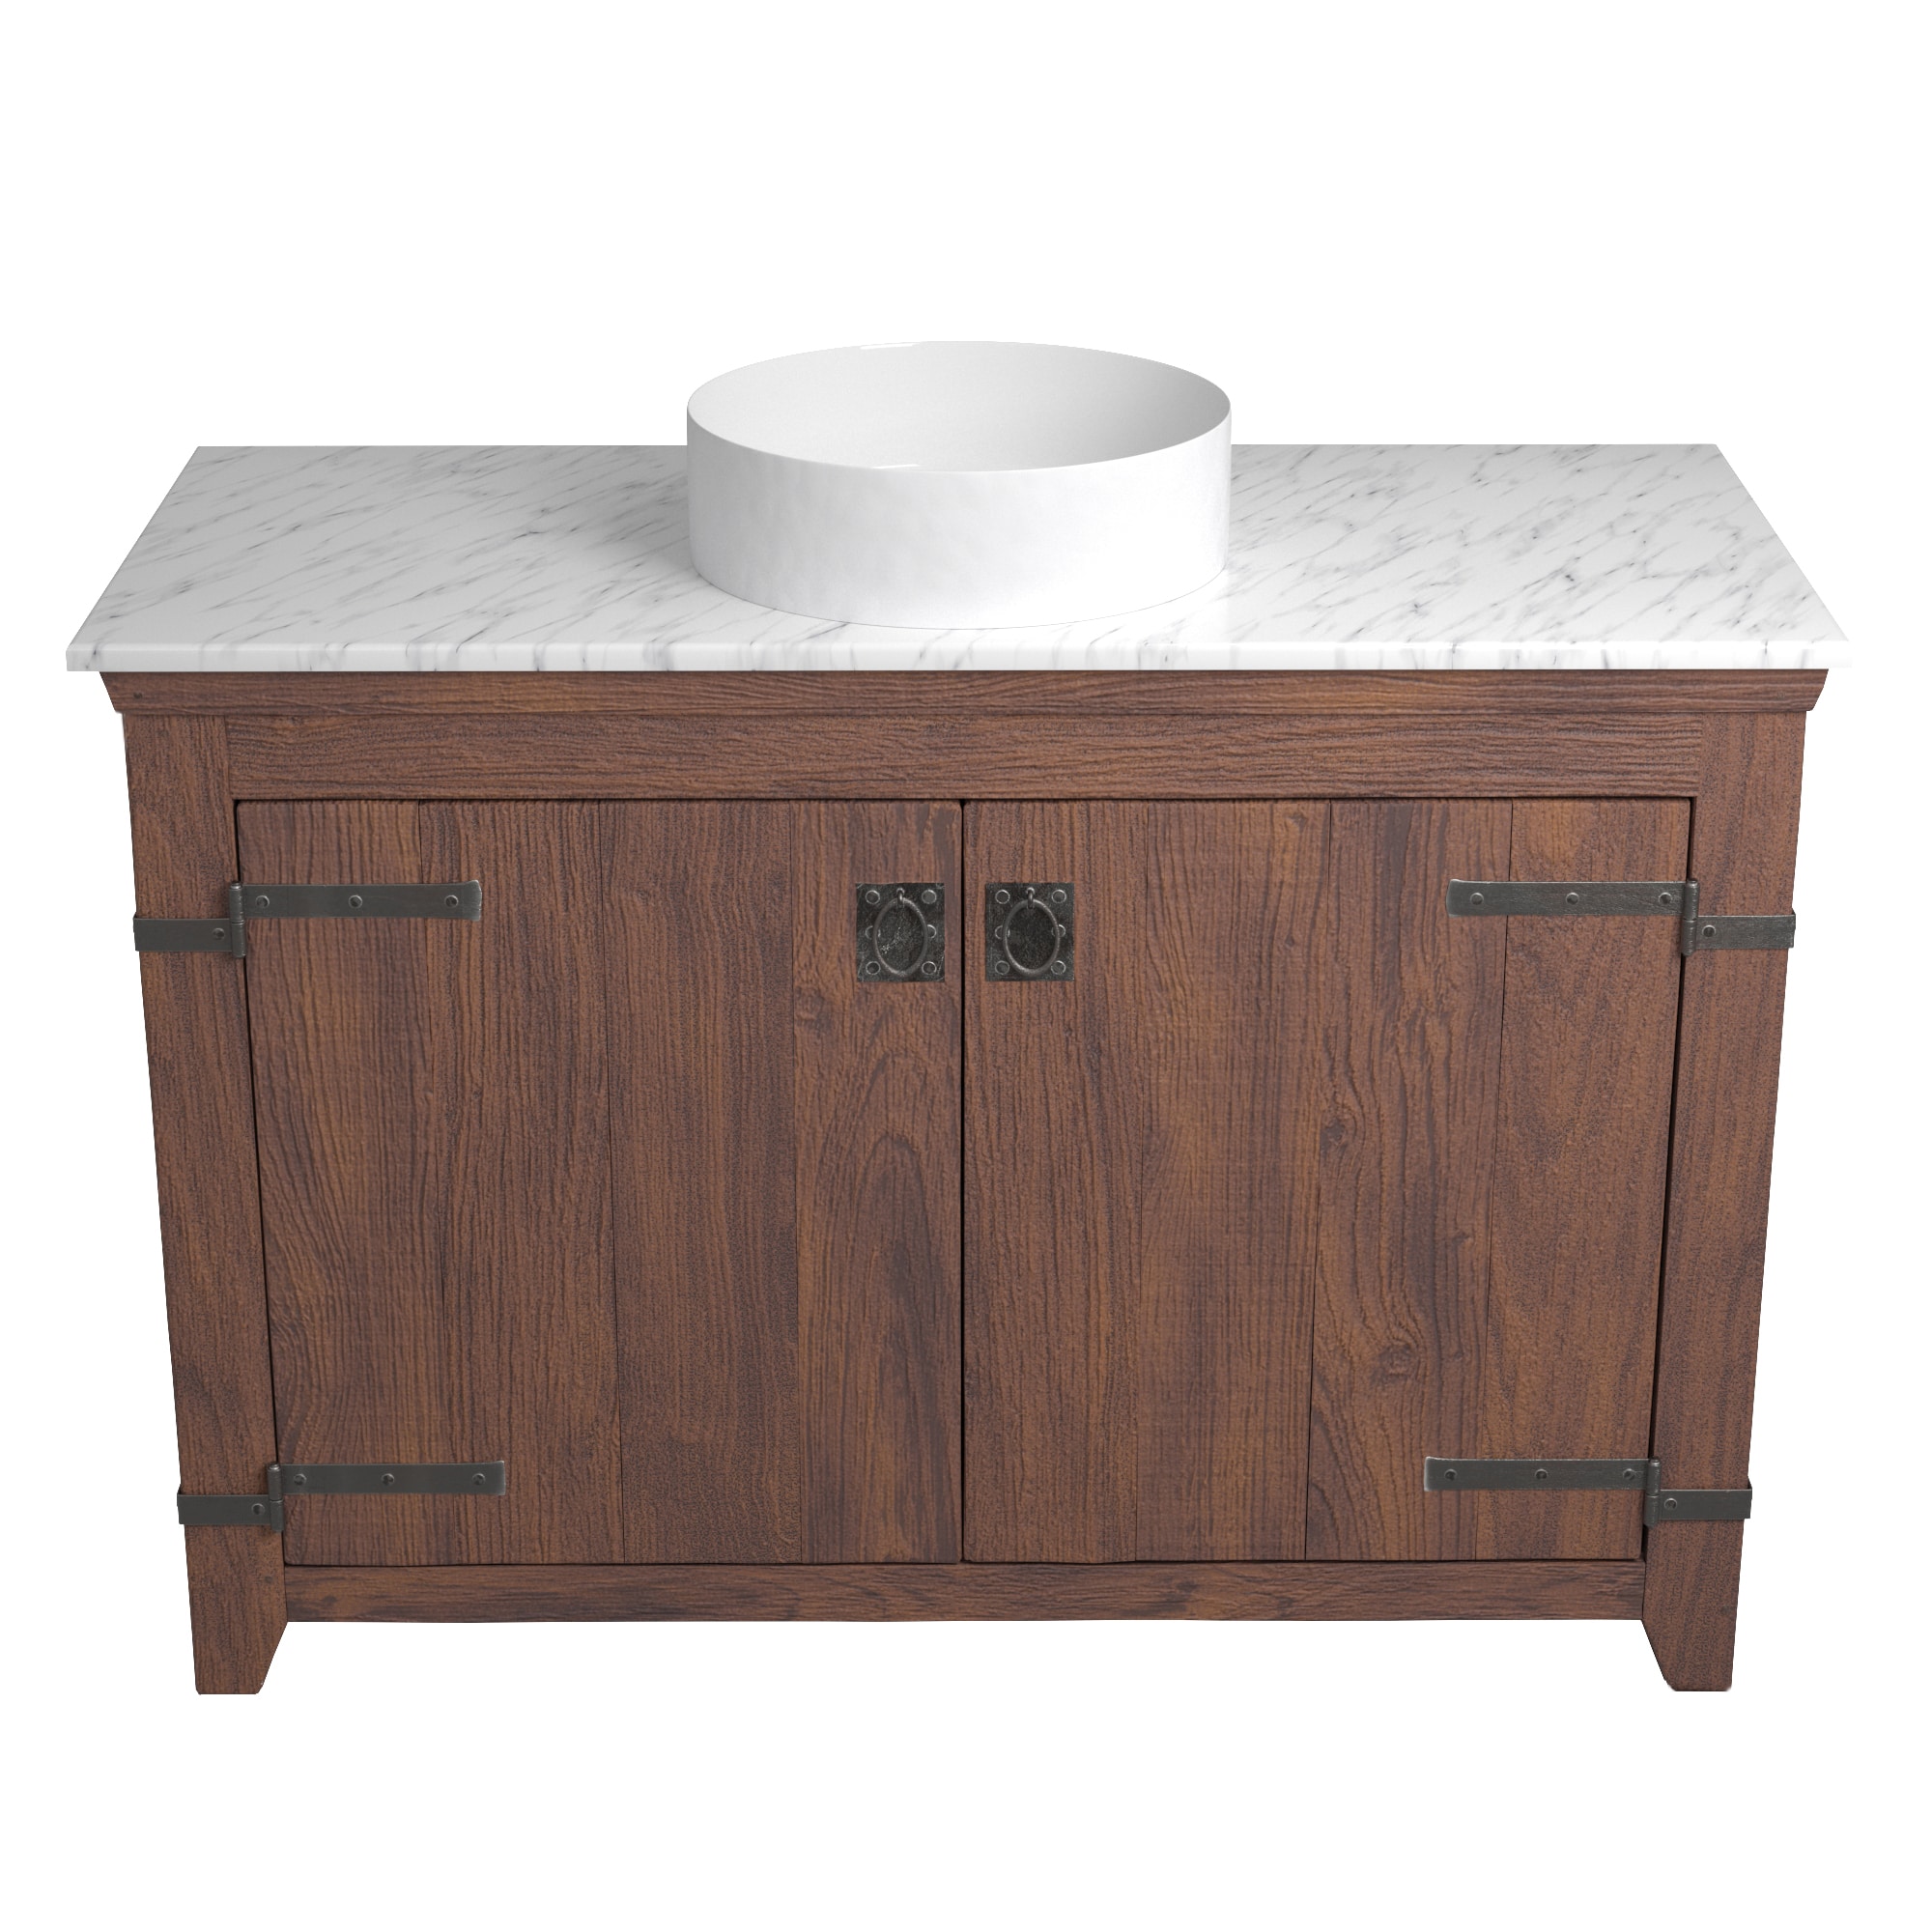 Native Trails 48" Americana Vanity in Chestnut with Carrara Marble Top and Positano in Bianco, No Faucet Hole, BND48-VB-CT-MG-052